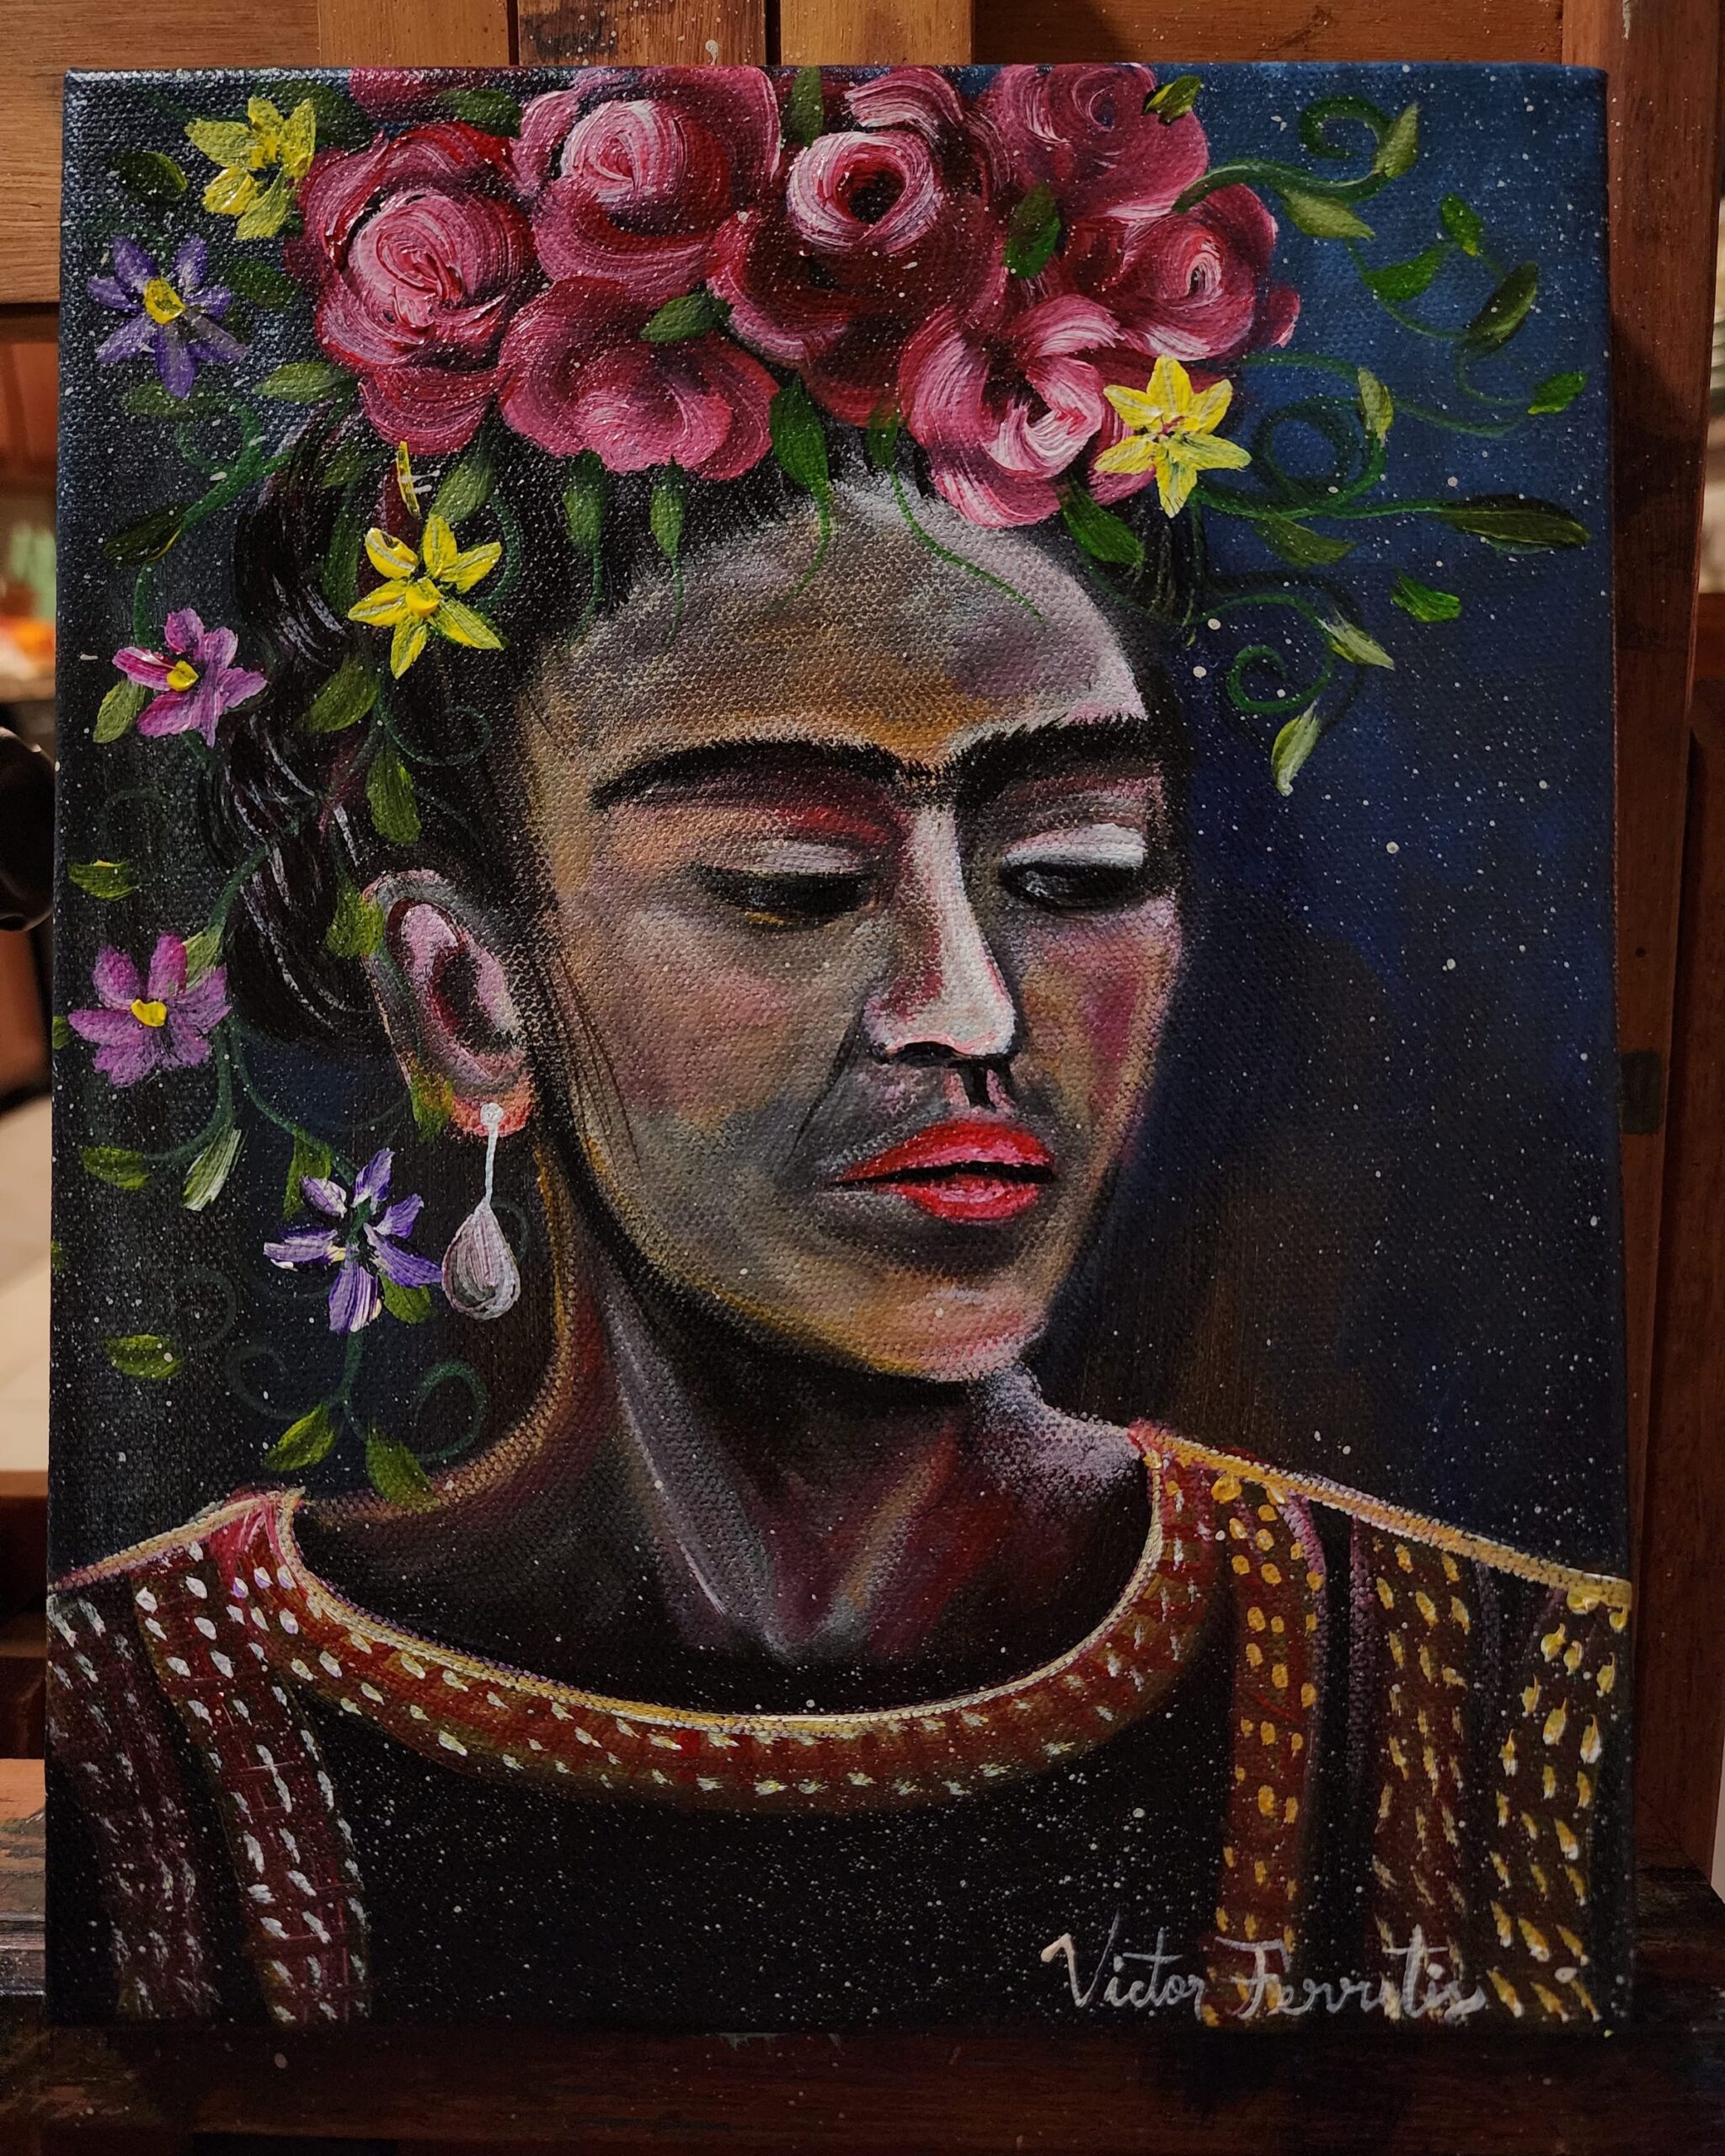 Semi-Abstract depiction of the eminent Mexican artist, Frida Kahlo. Acrylic on gallery canvas. Size: 8x10x1.5 inches.